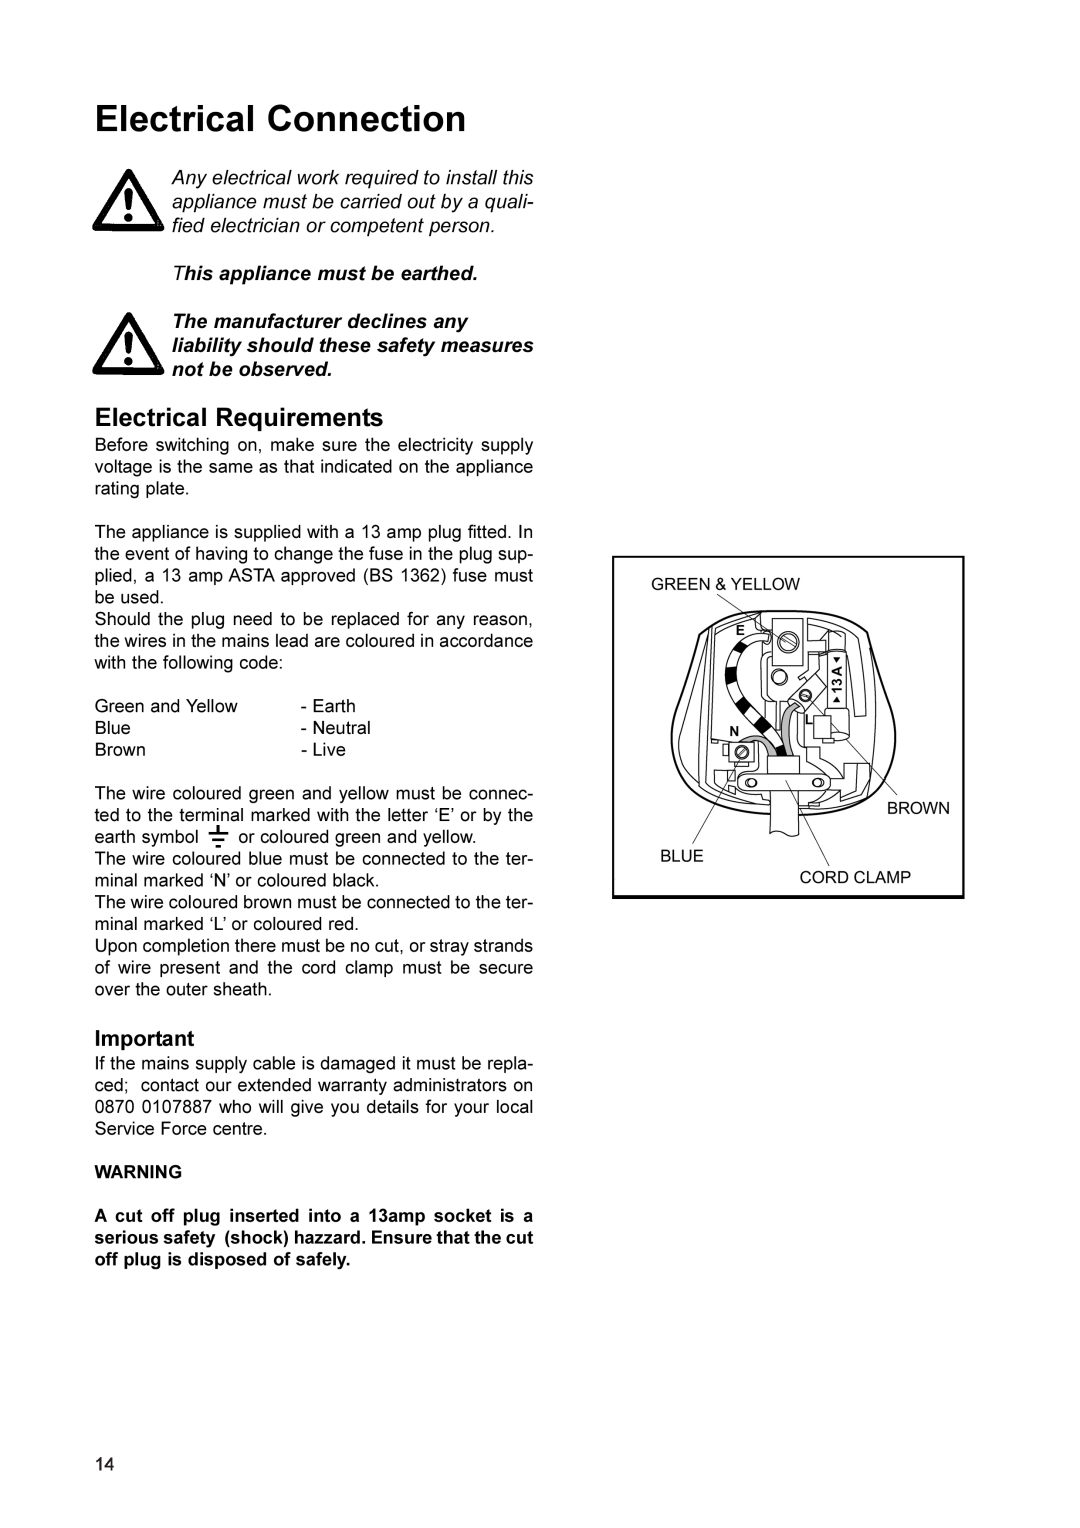 John Lewis JLFFS2002 manual Electrical Connection, Electrical Requirements 